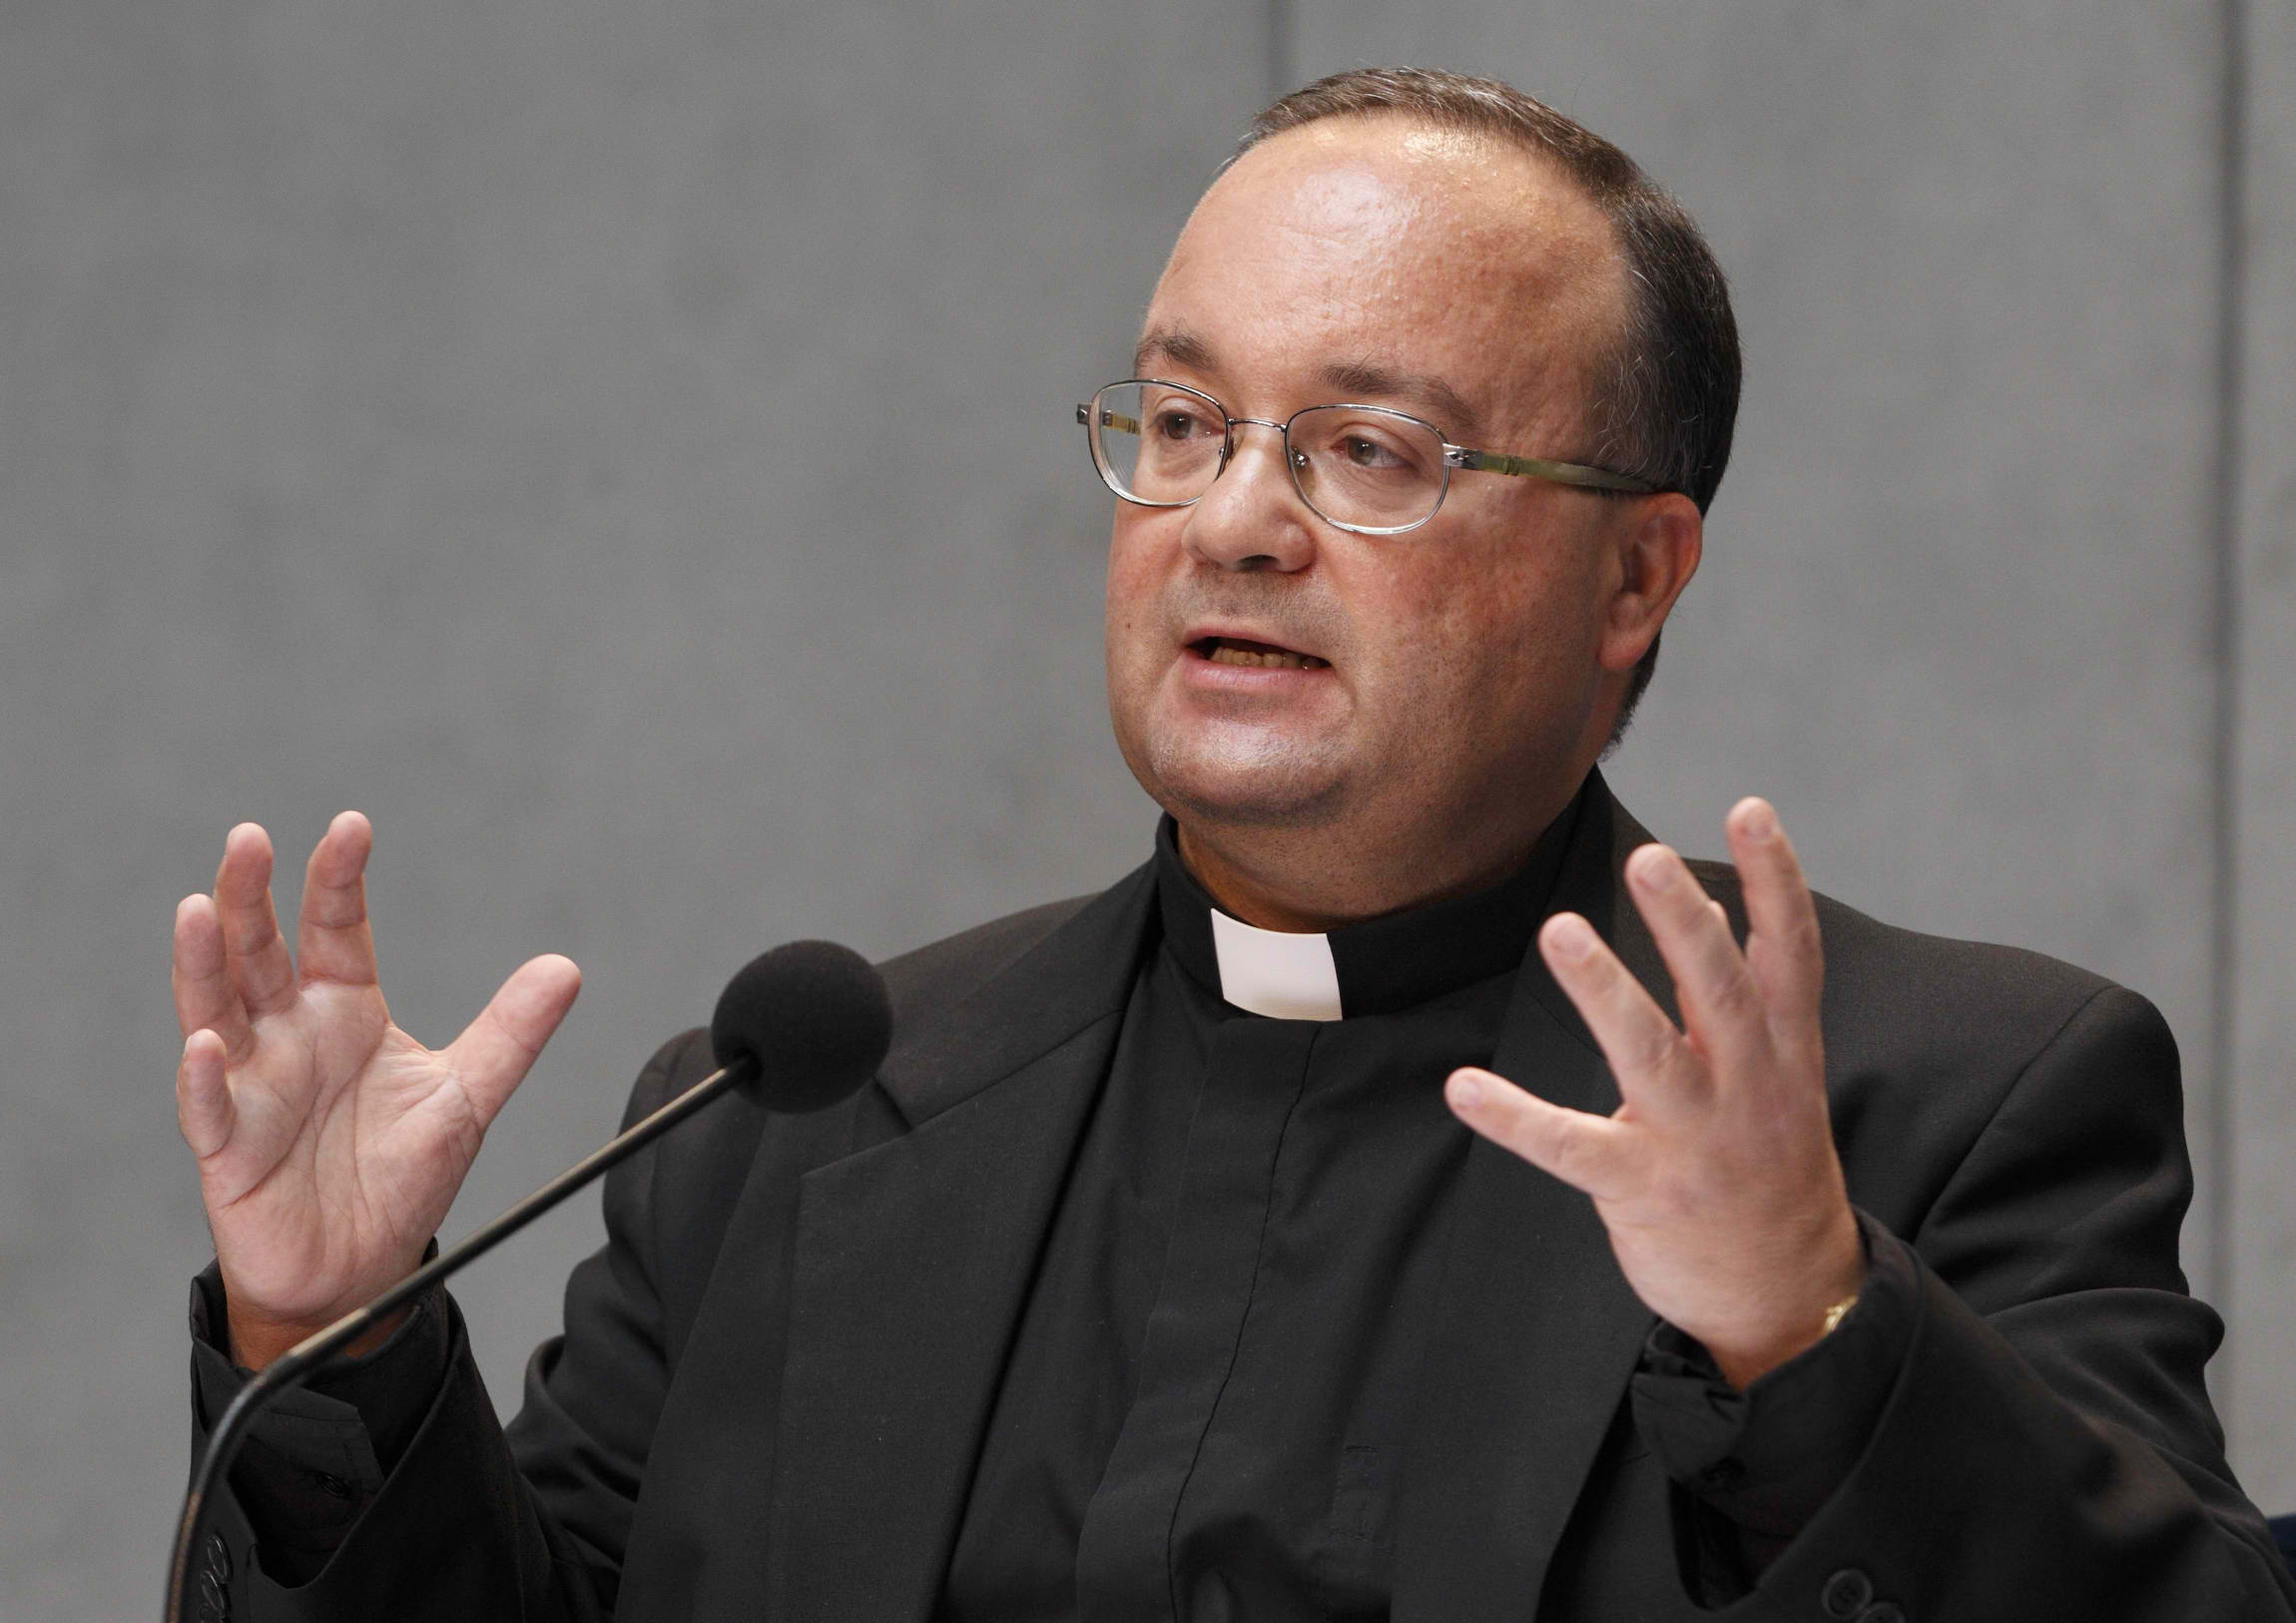 Charles Scicluna, the Vatican's former chief prosecutor of clerical sexual abuse